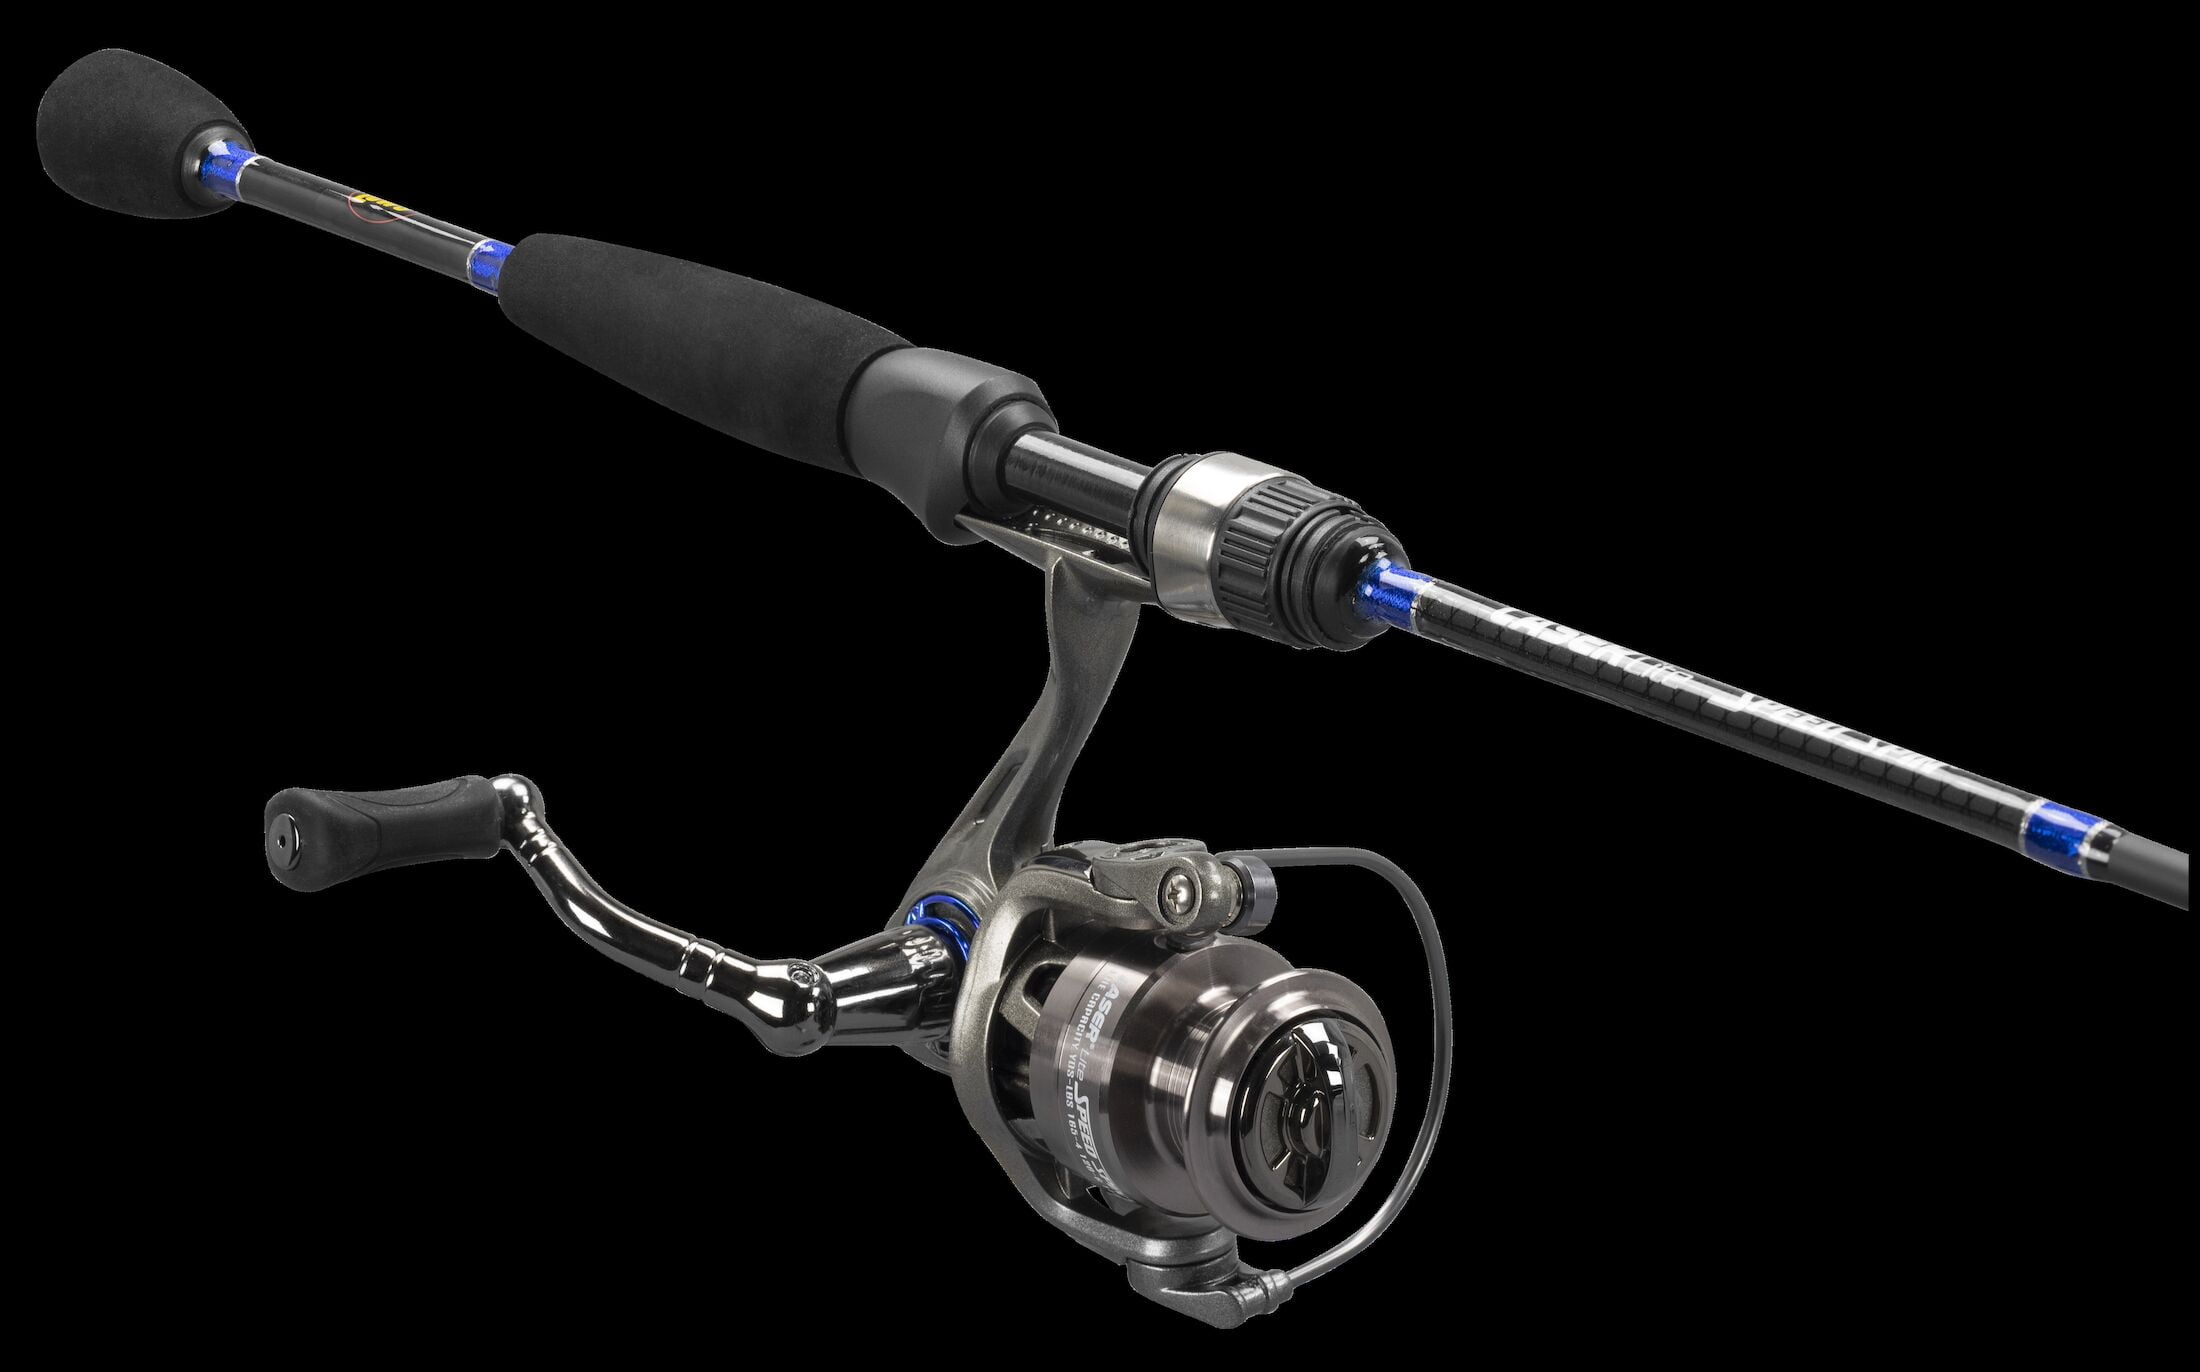 Lew's Laser SG Speed Spin Spinning Fishing Reel, Size 100 Reel, Silver 